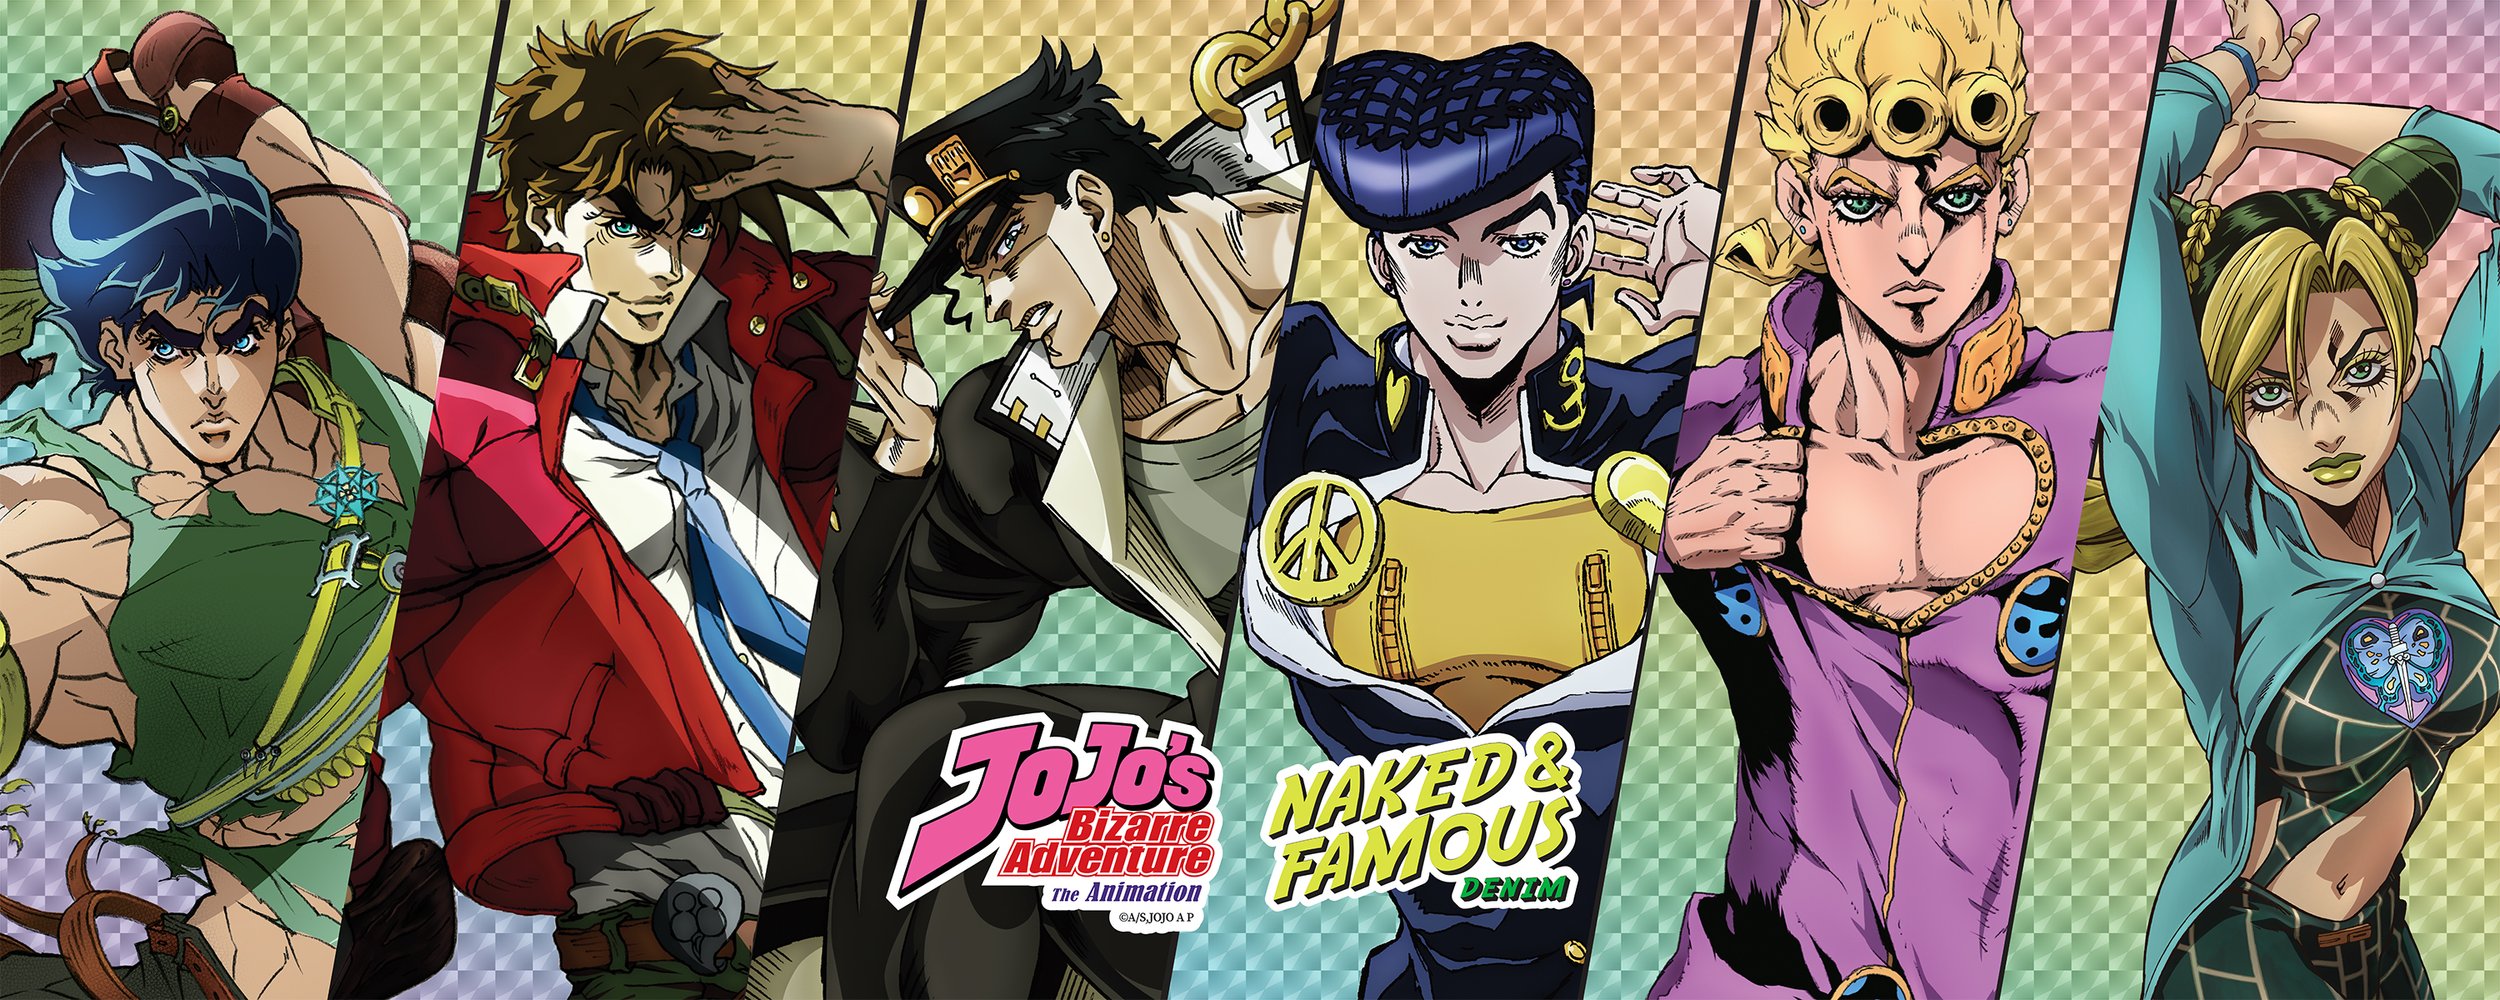 Naked & Famous Denim Collaborates with JoJo’s Bizarre Adventure for an Exclusive Capsule Collection